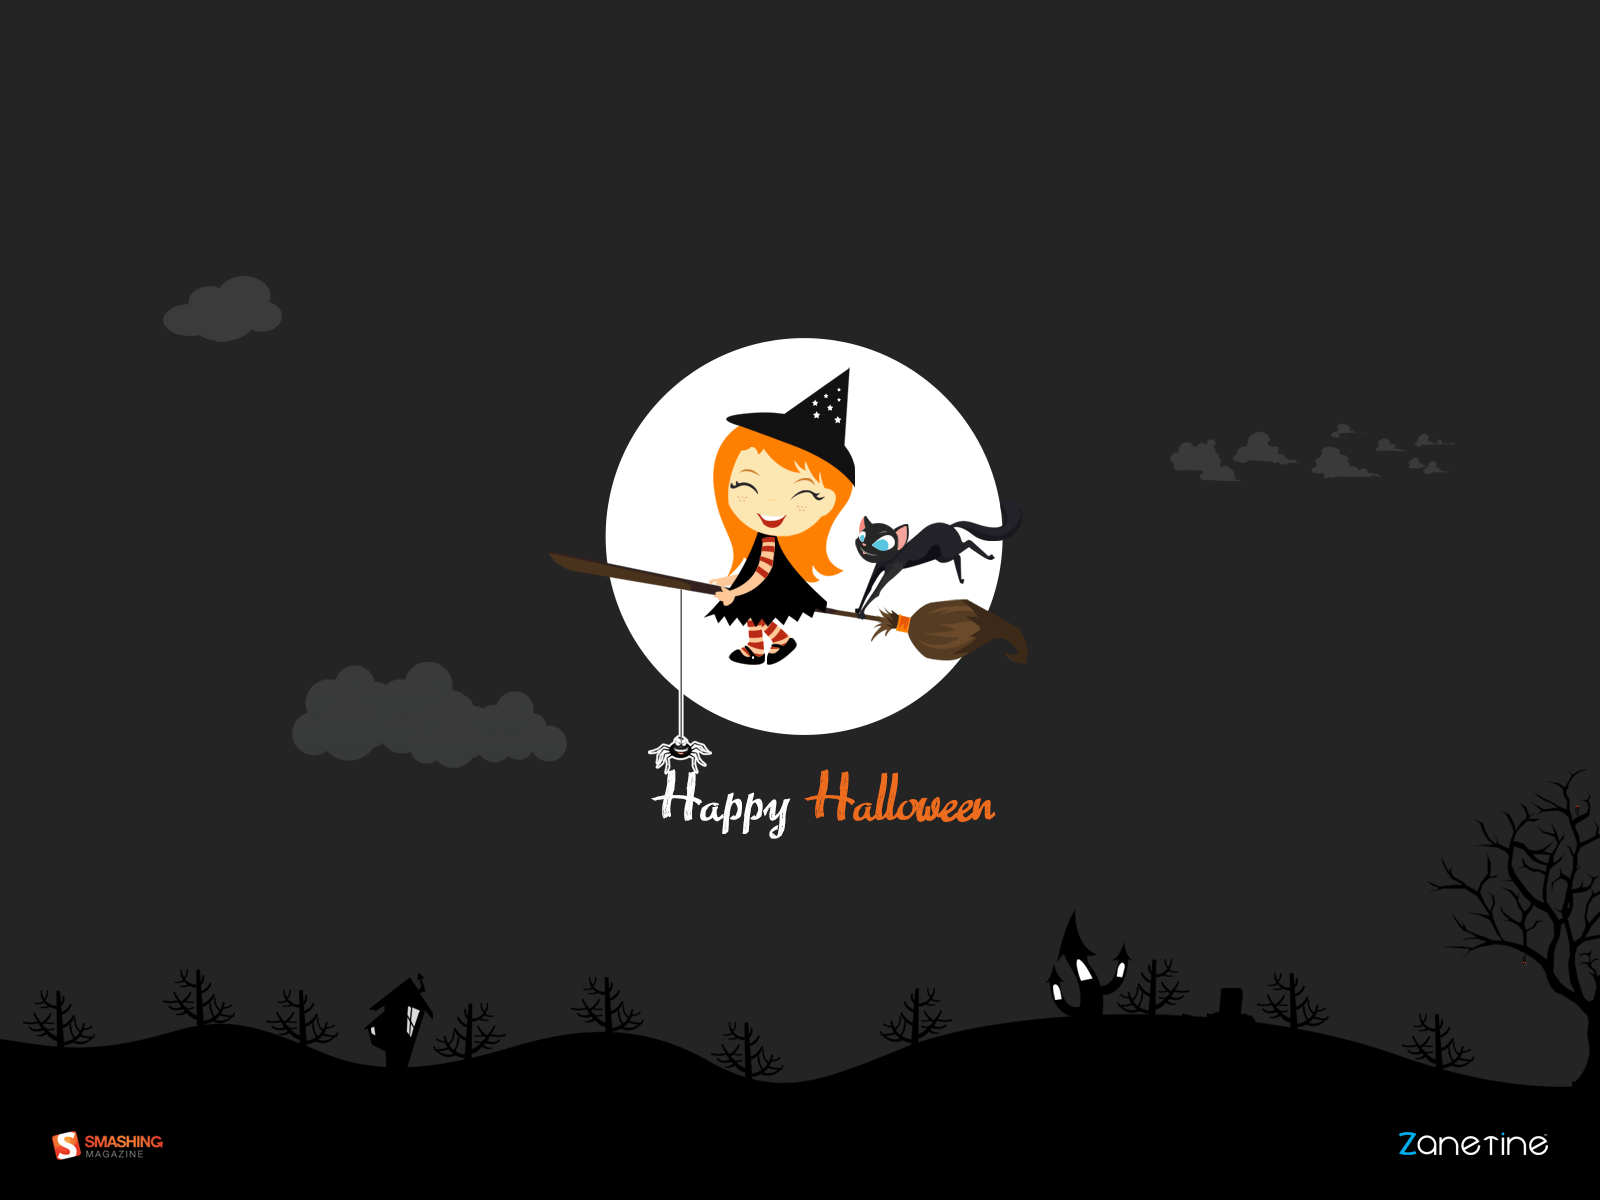 Halloween Wallpaper ? Scary Monsters, Pumpkins And Zombies